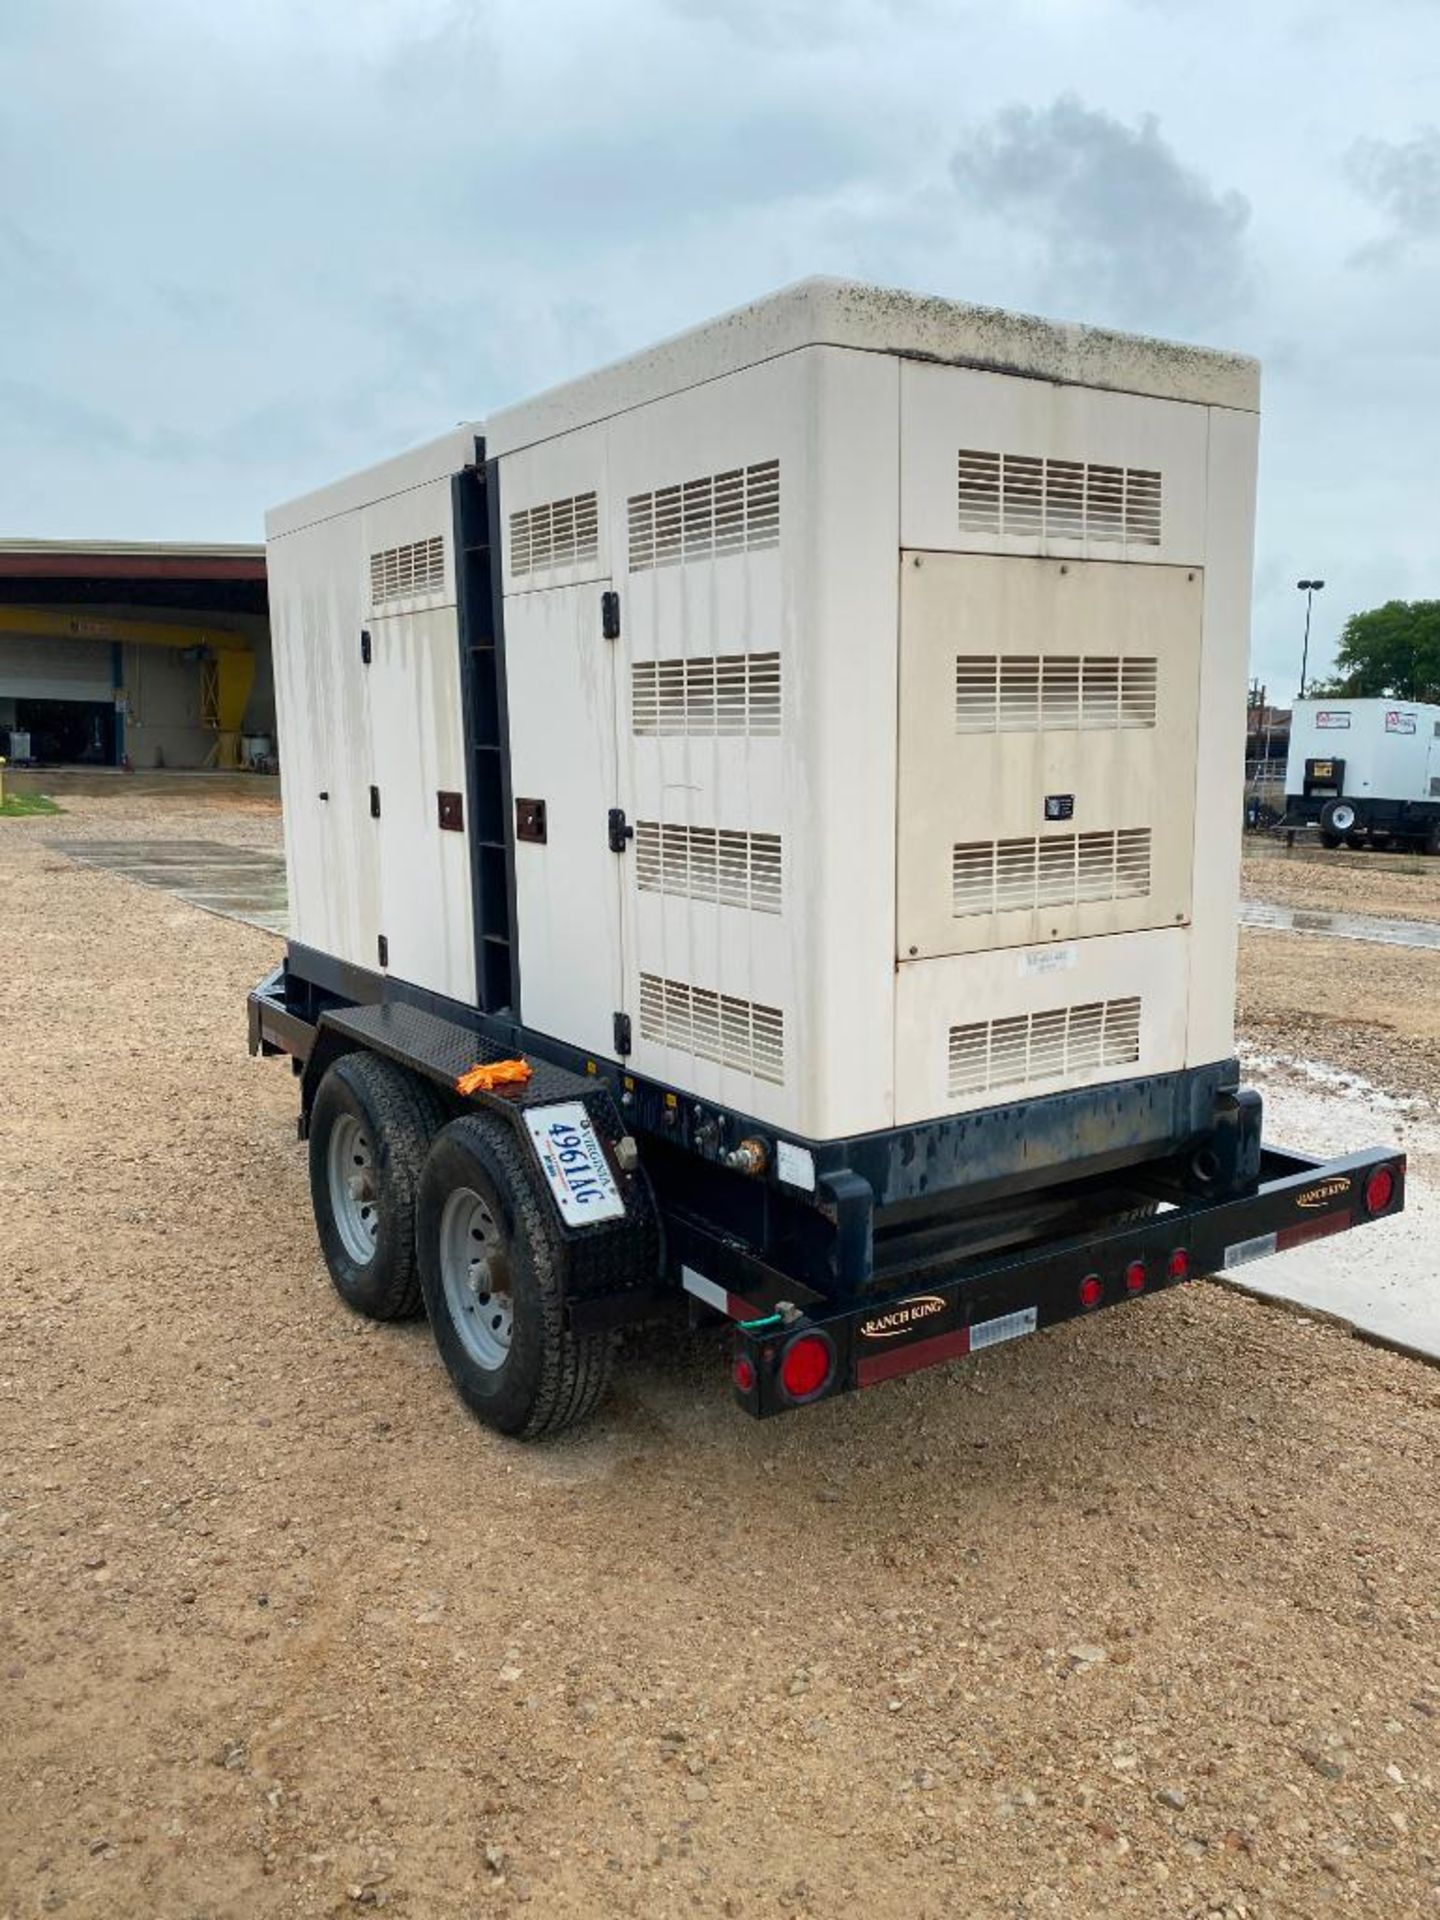 2014 AltaStream Power Systems 125 KVA Towable Generator, Dual Fuel Natural Gas or LP, Model APHG150- - Image 4 of 12